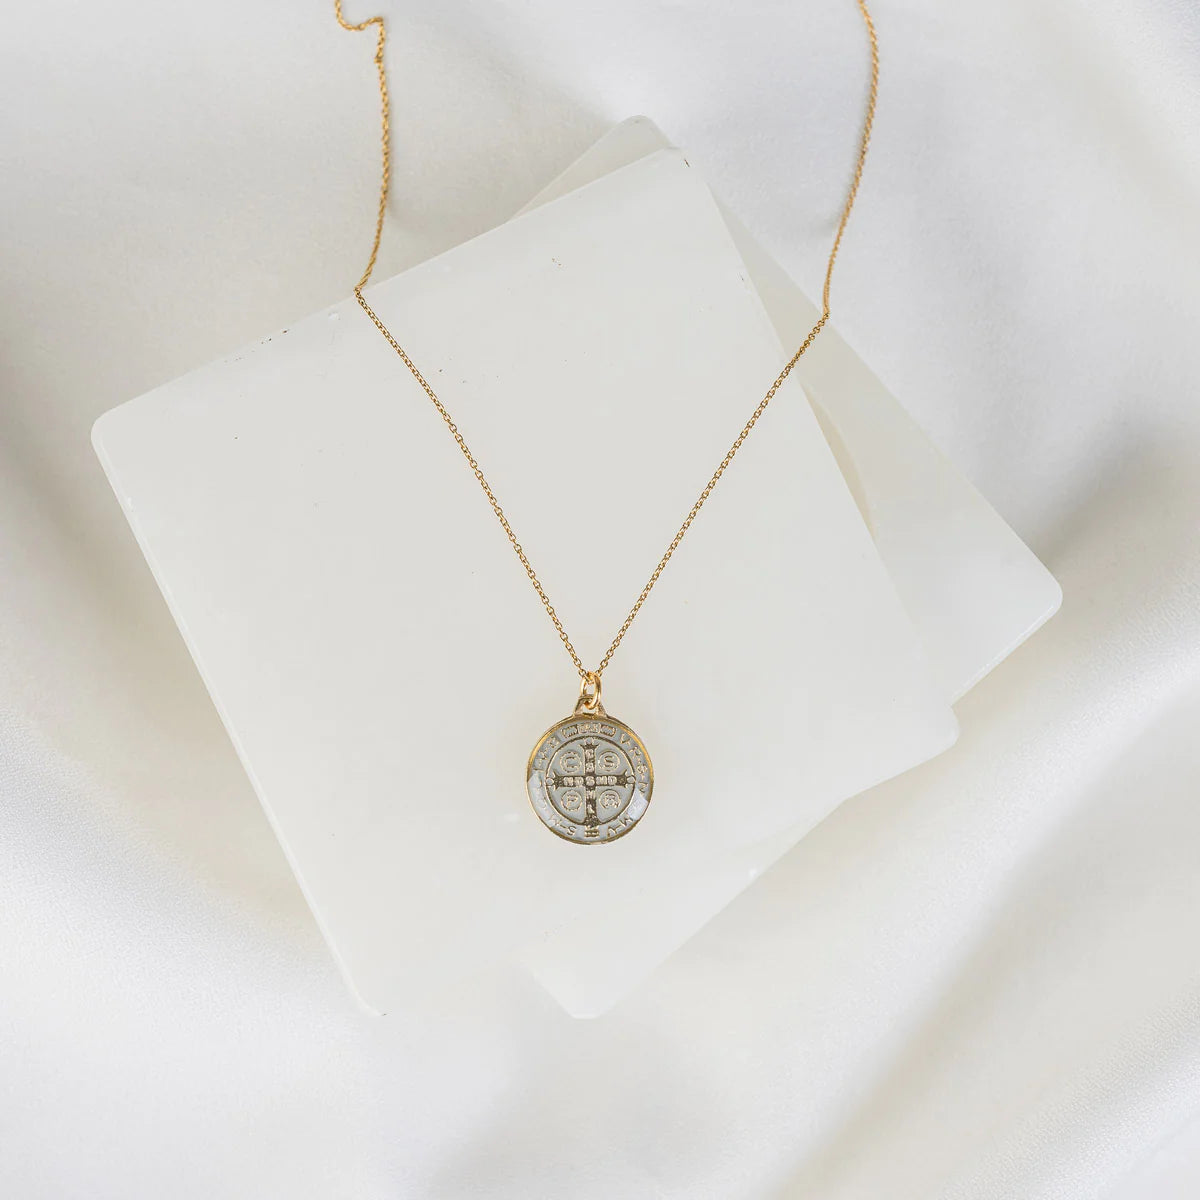 MSMH Jubilee Medal of St. Benedict Necklace